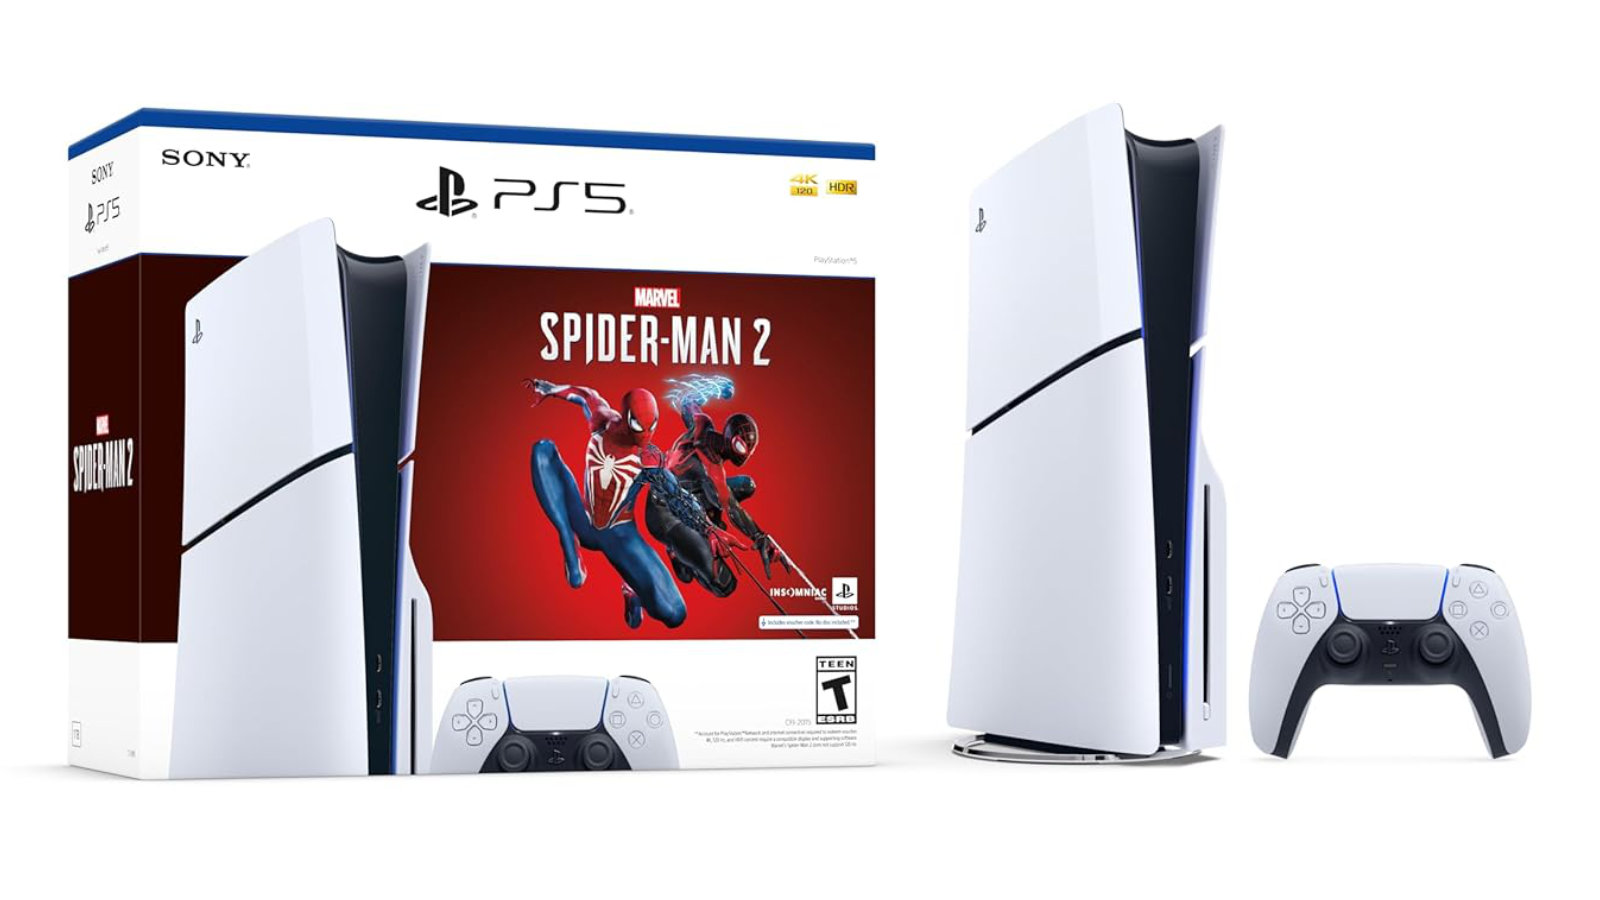 PS5 Slim product retail packaging.